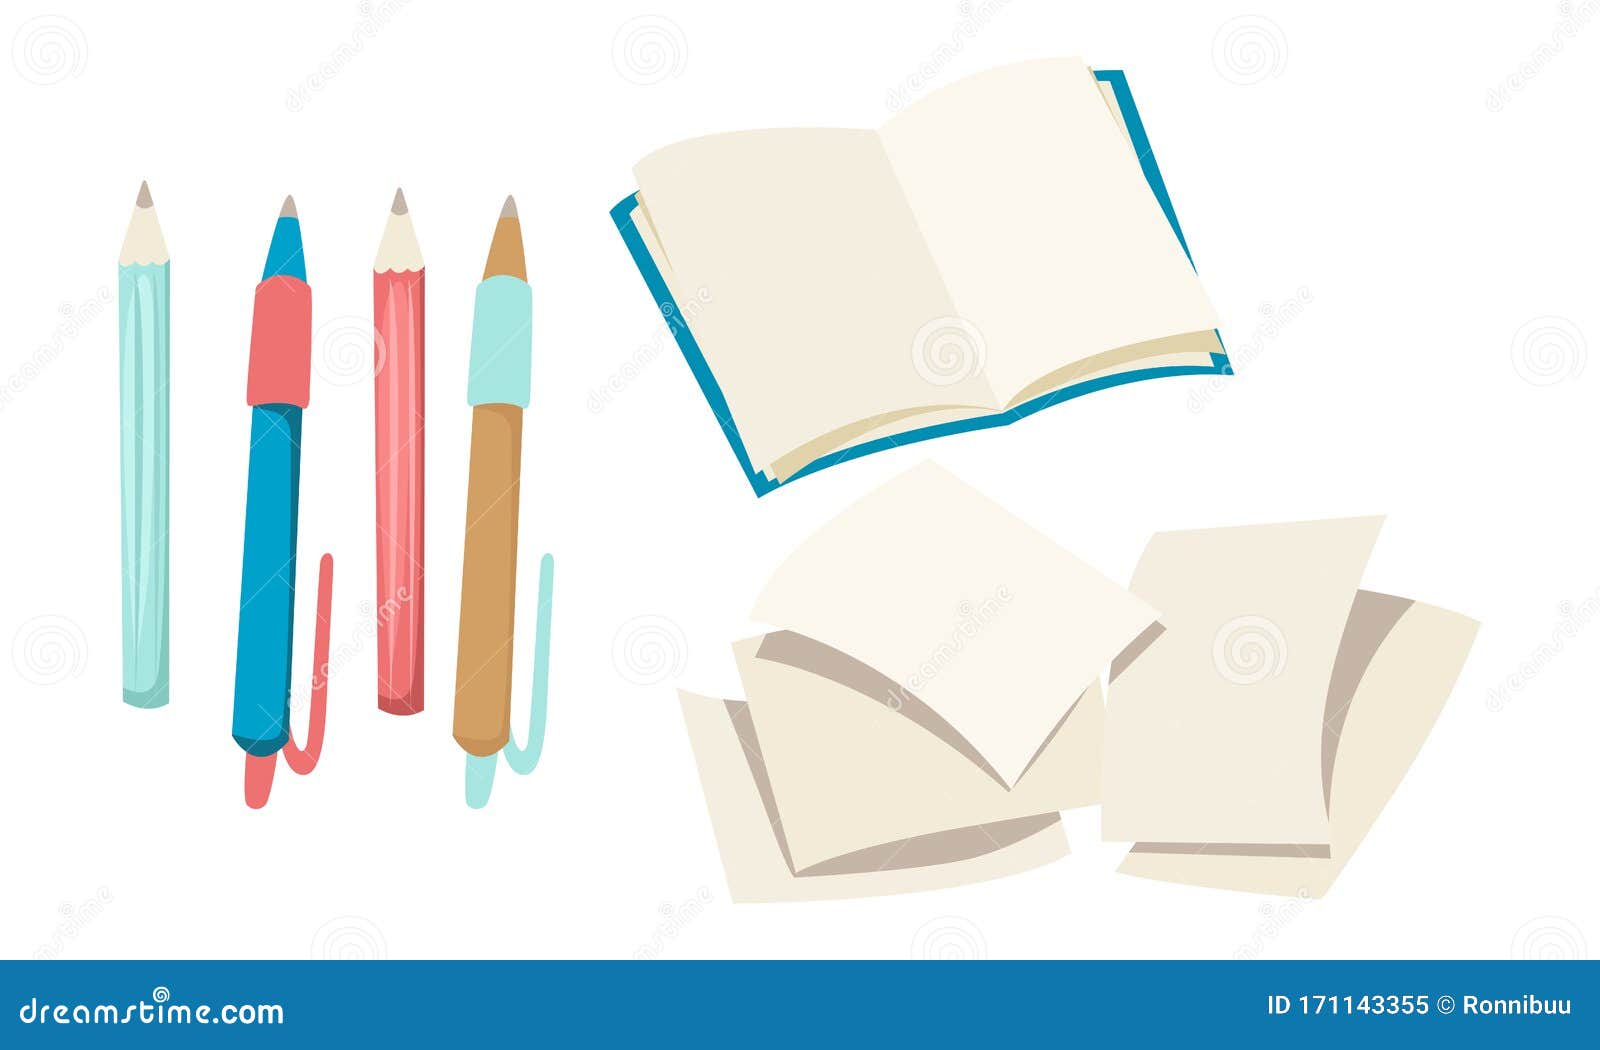 Stationery, Open Book, Pencils and Pens, Blank Pages. Vector Illustration  Stock Vector - Illustration of icons, notebook: 171143355